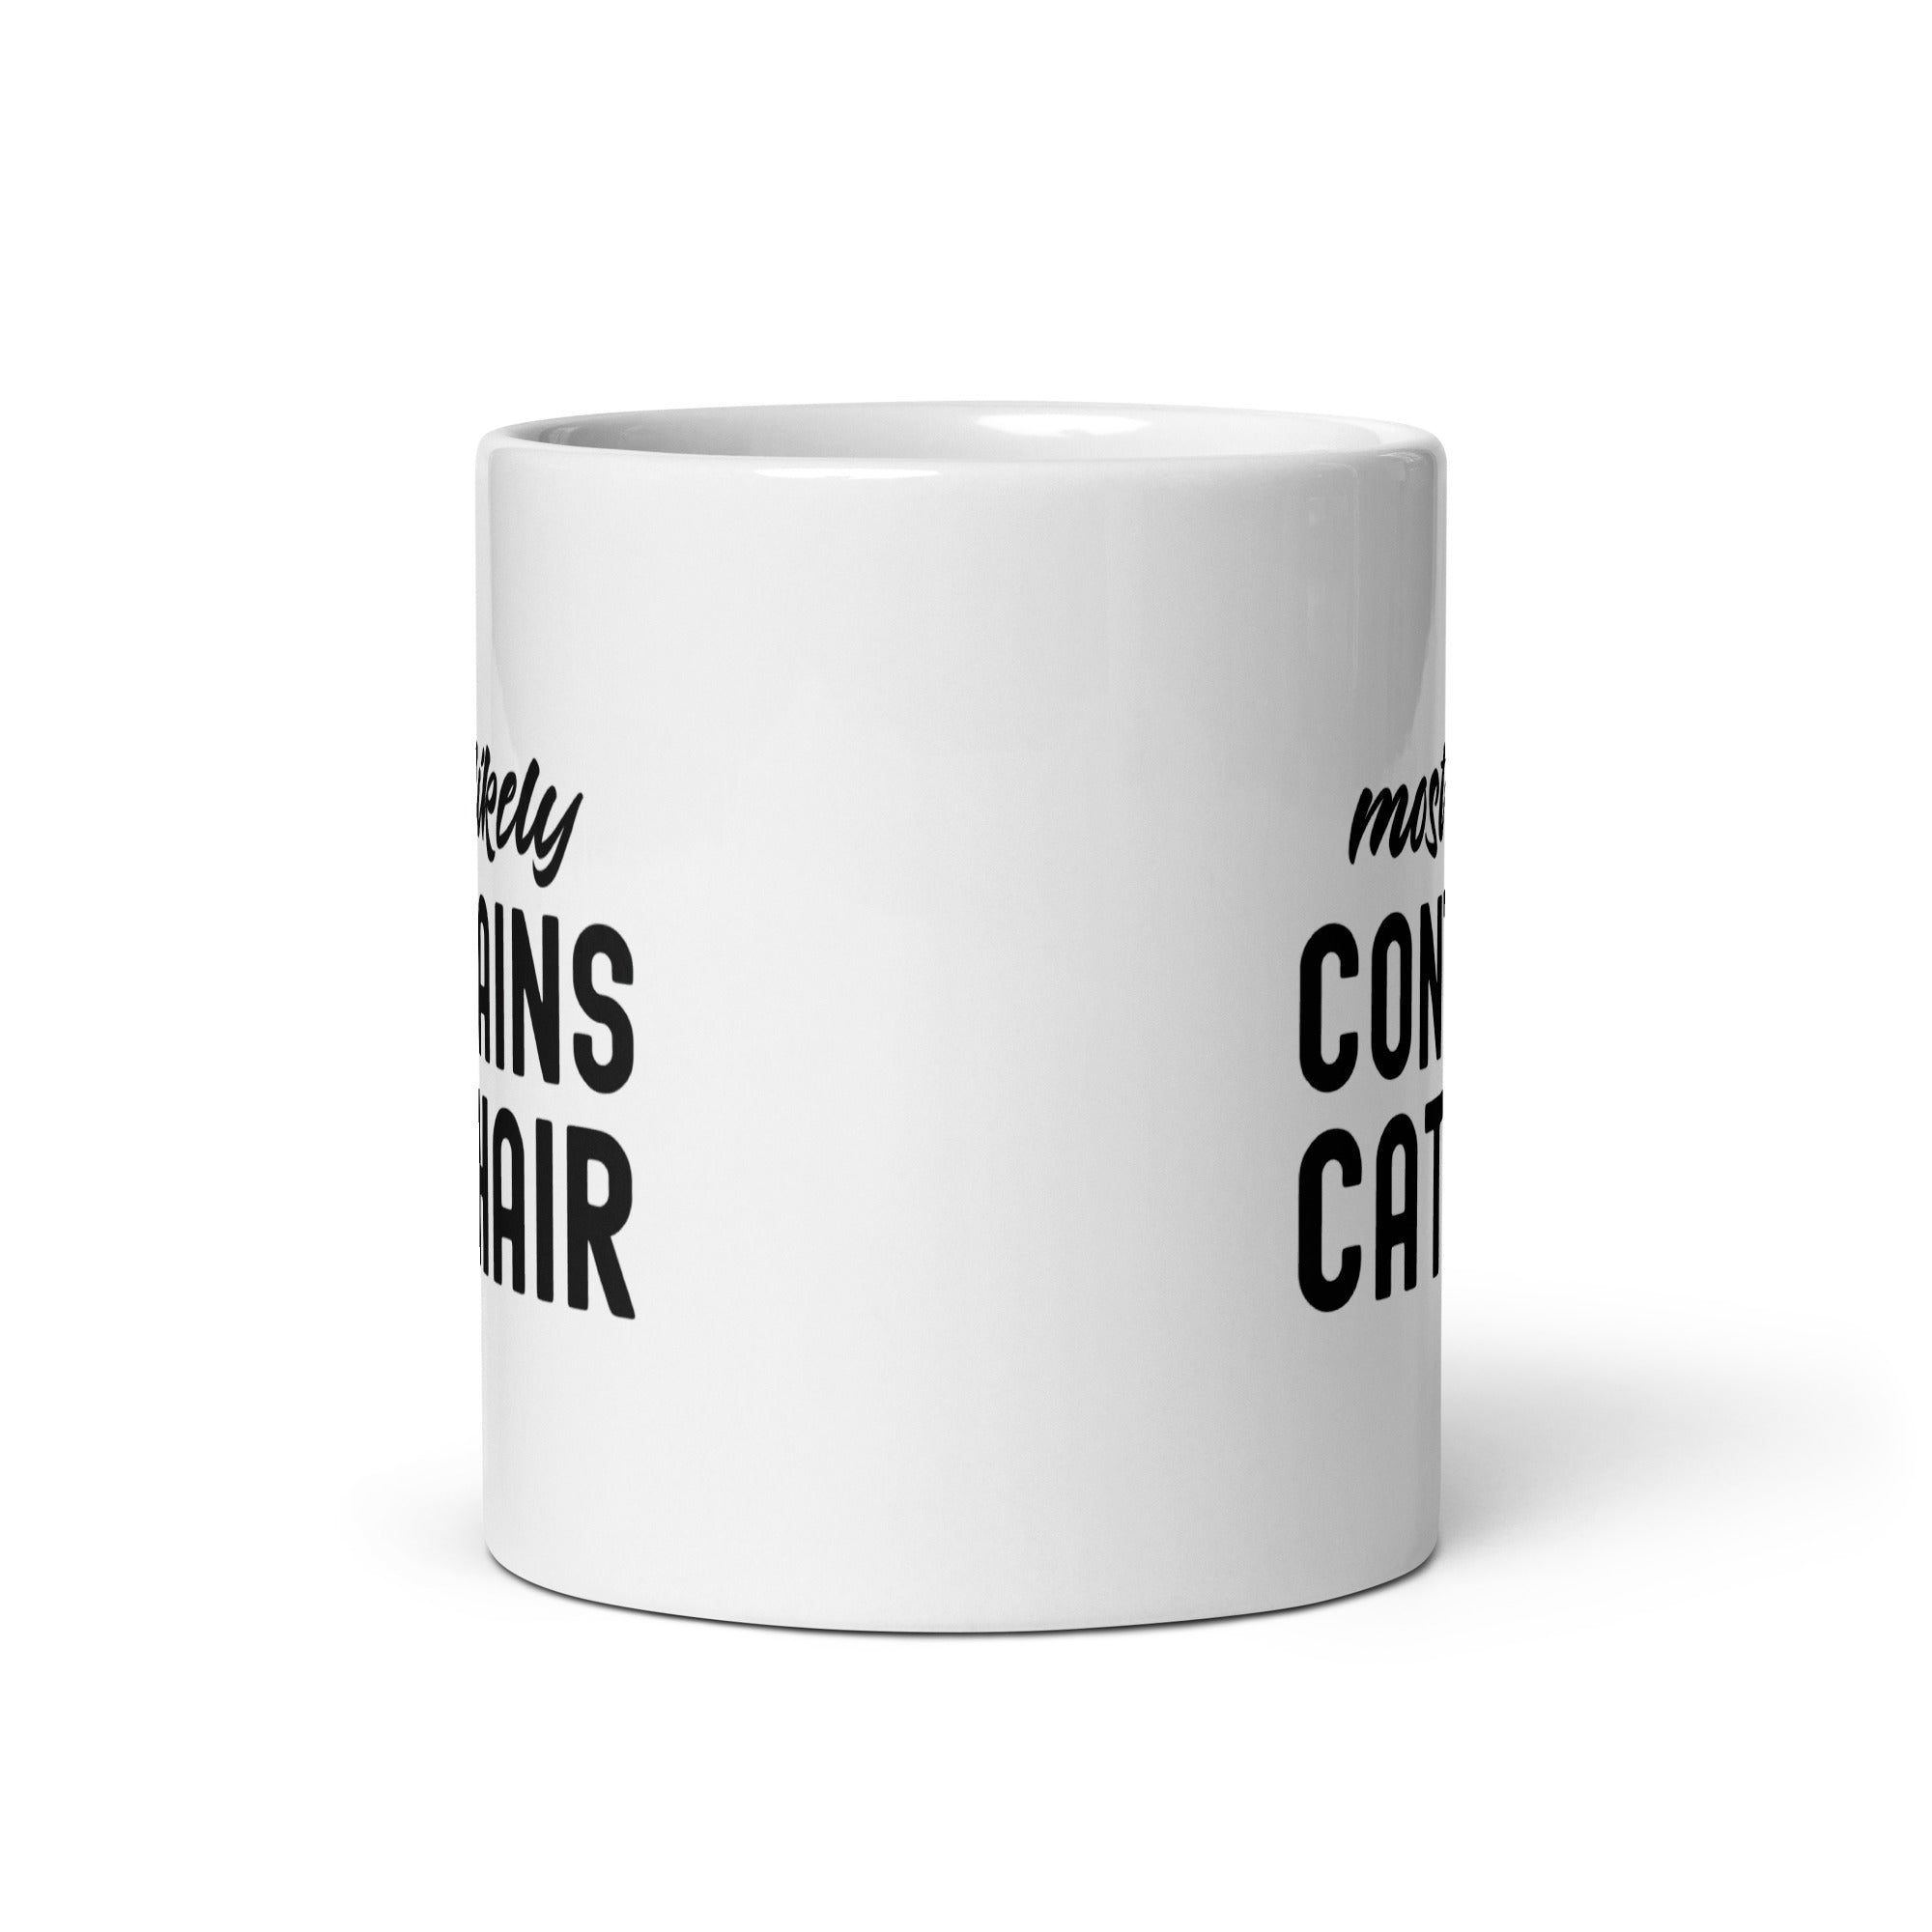 White glossy mug | Most Likely Contains Cat Hair